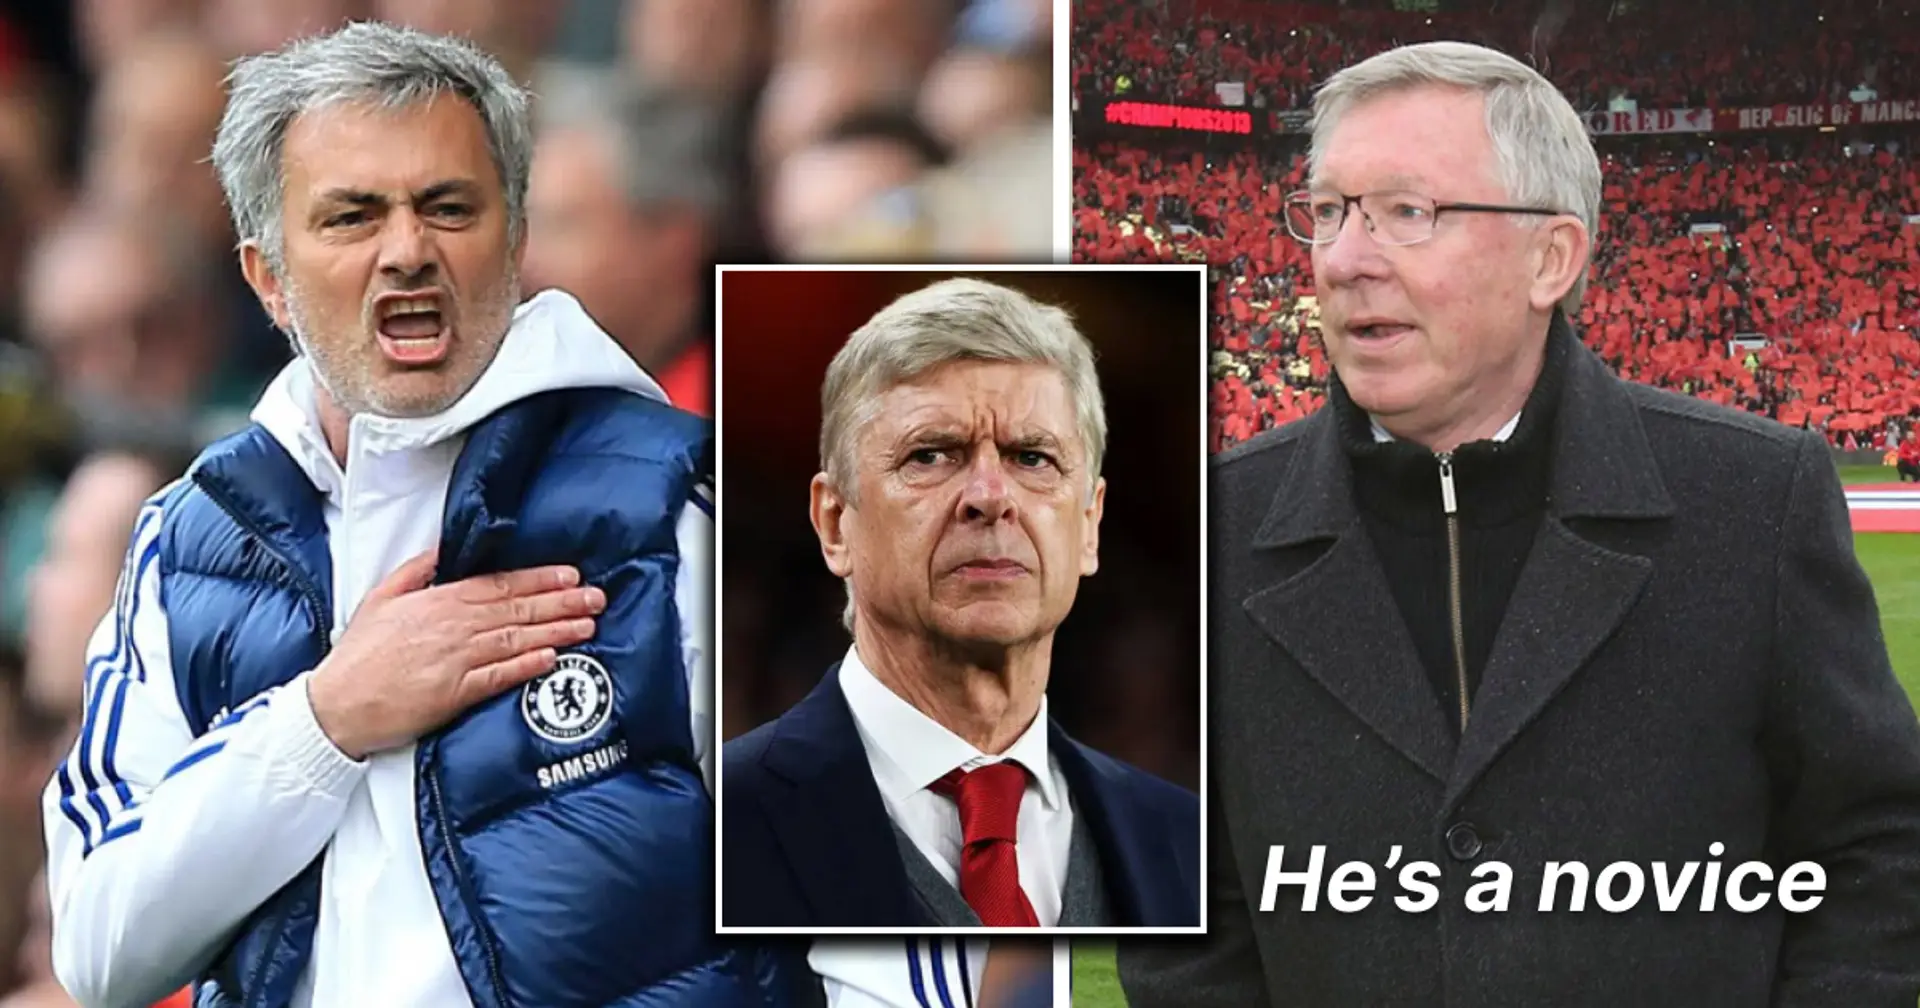 Sir Alex Ferguson's 6 most vicious jibes at other coaches